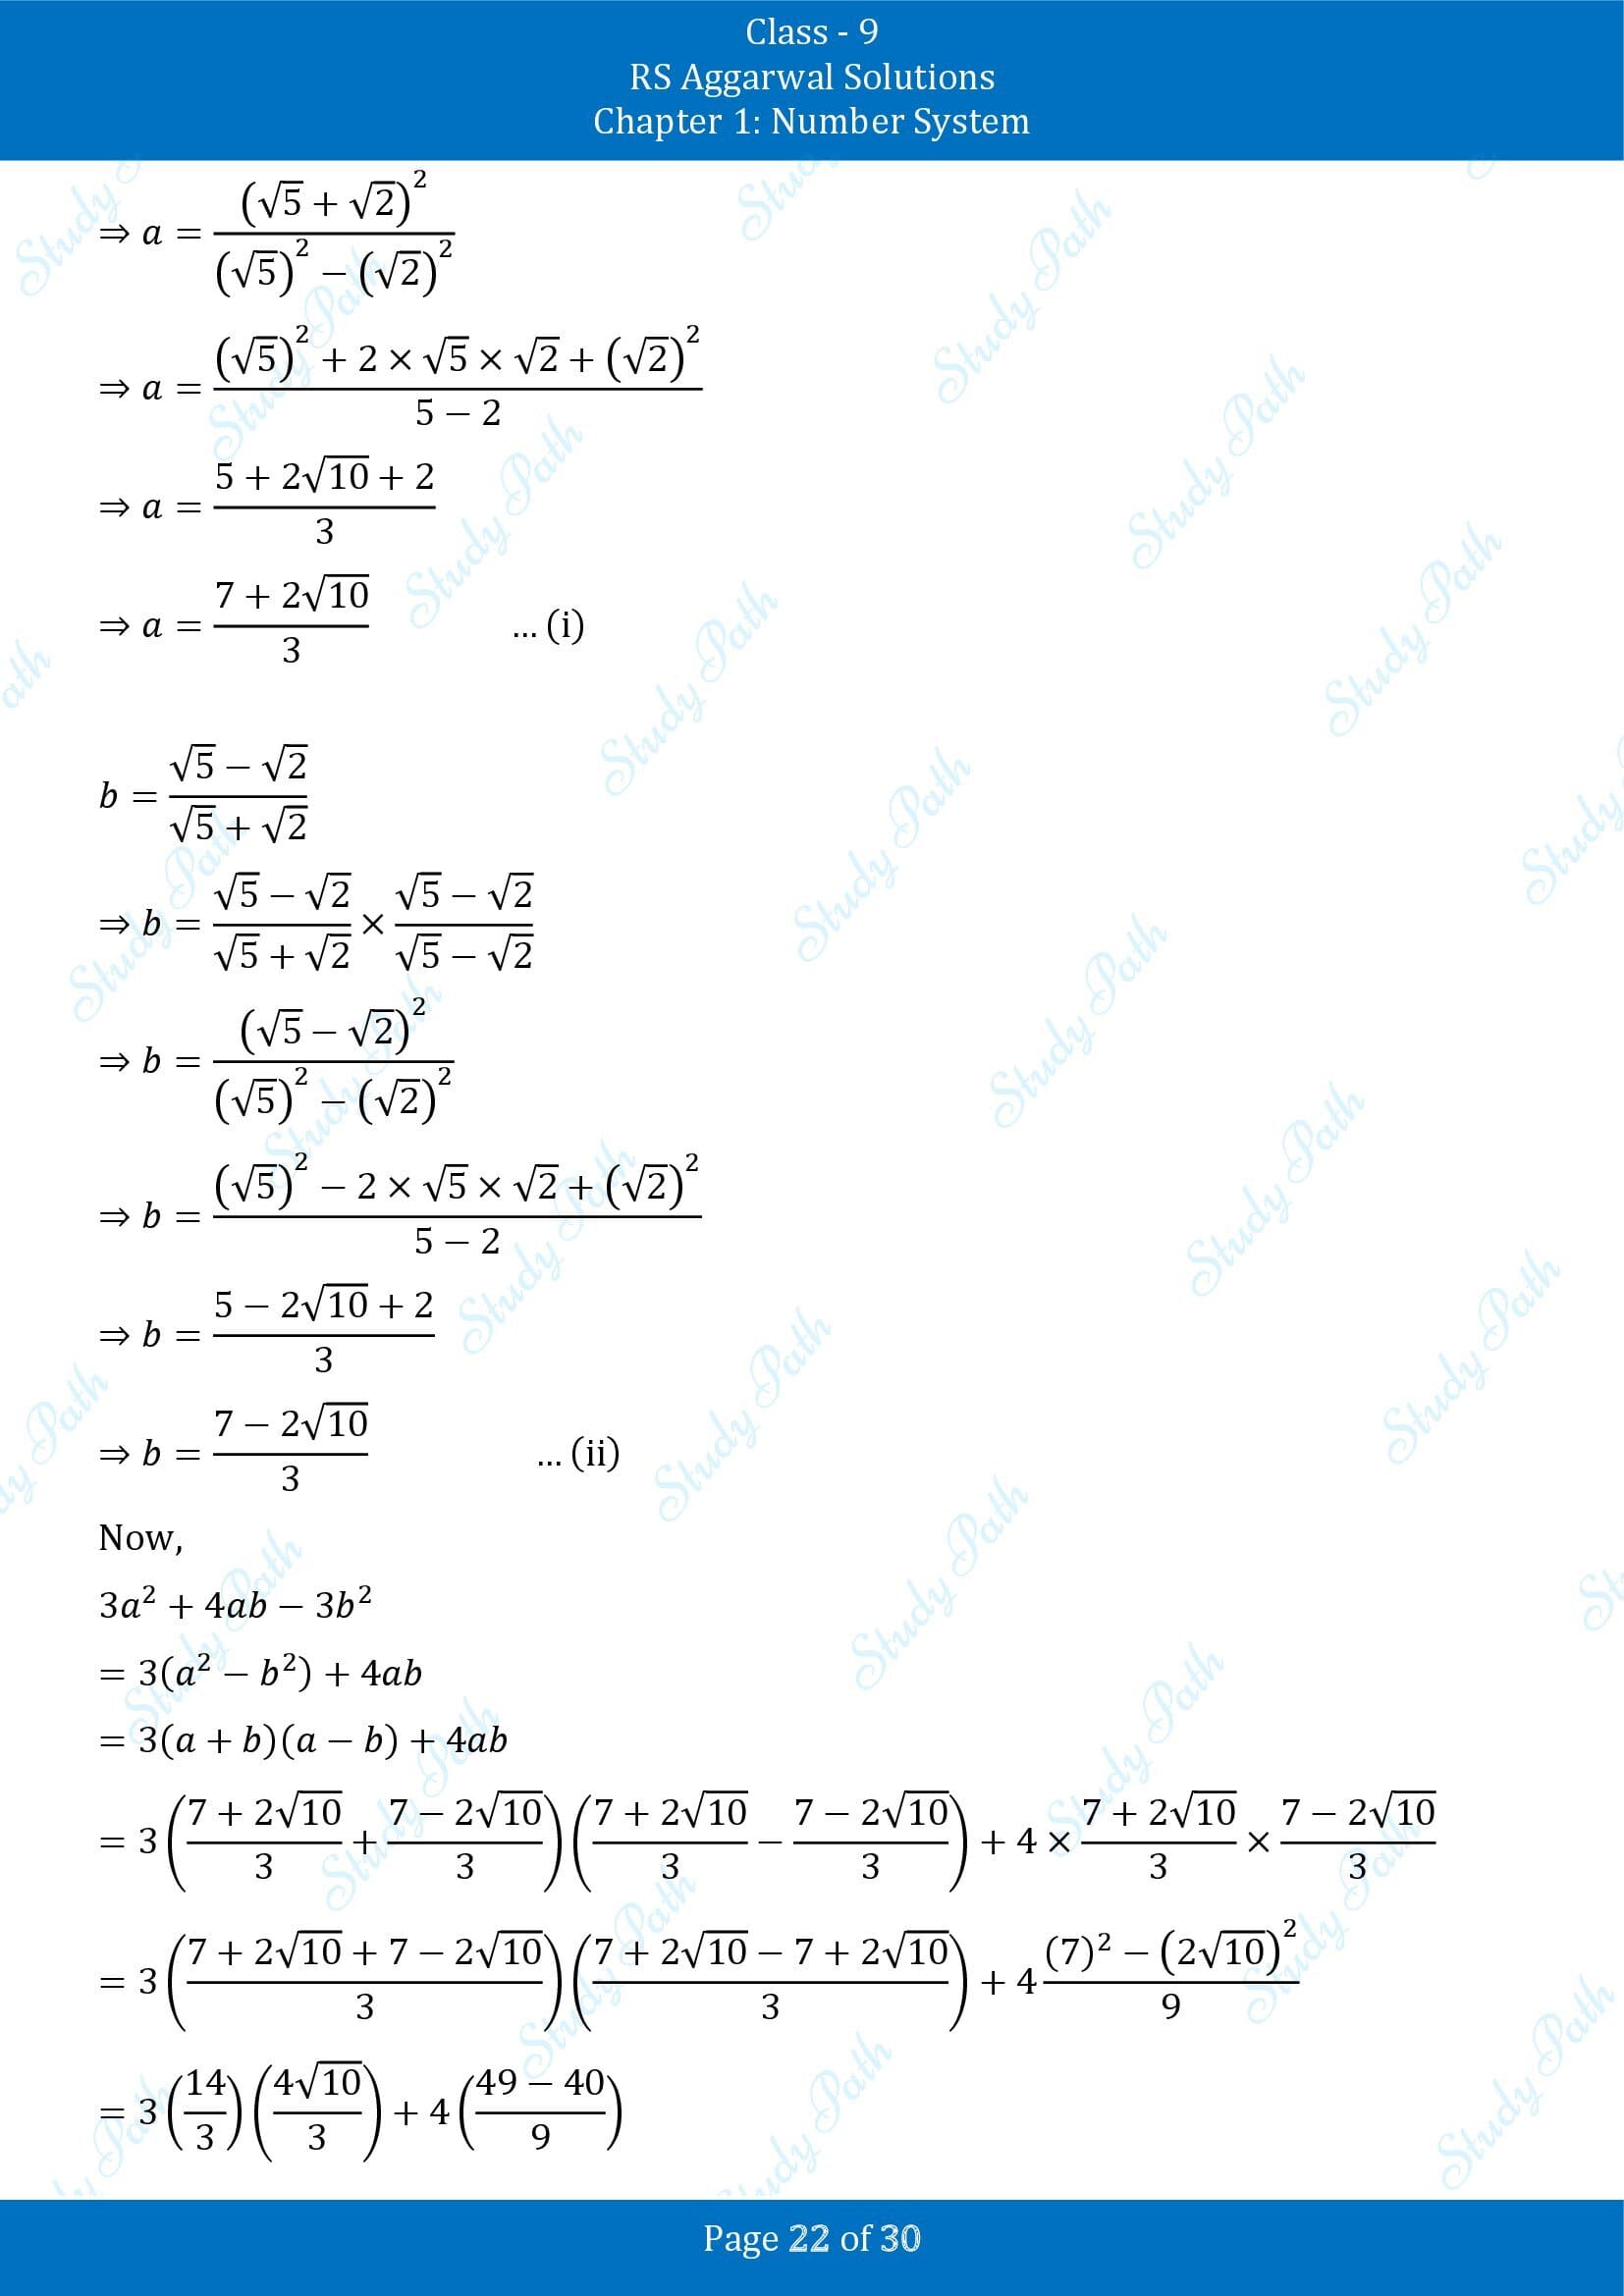 RS Aggarwal Solutions Class 9 Chapter 1 Number System Exercise 1F 00022